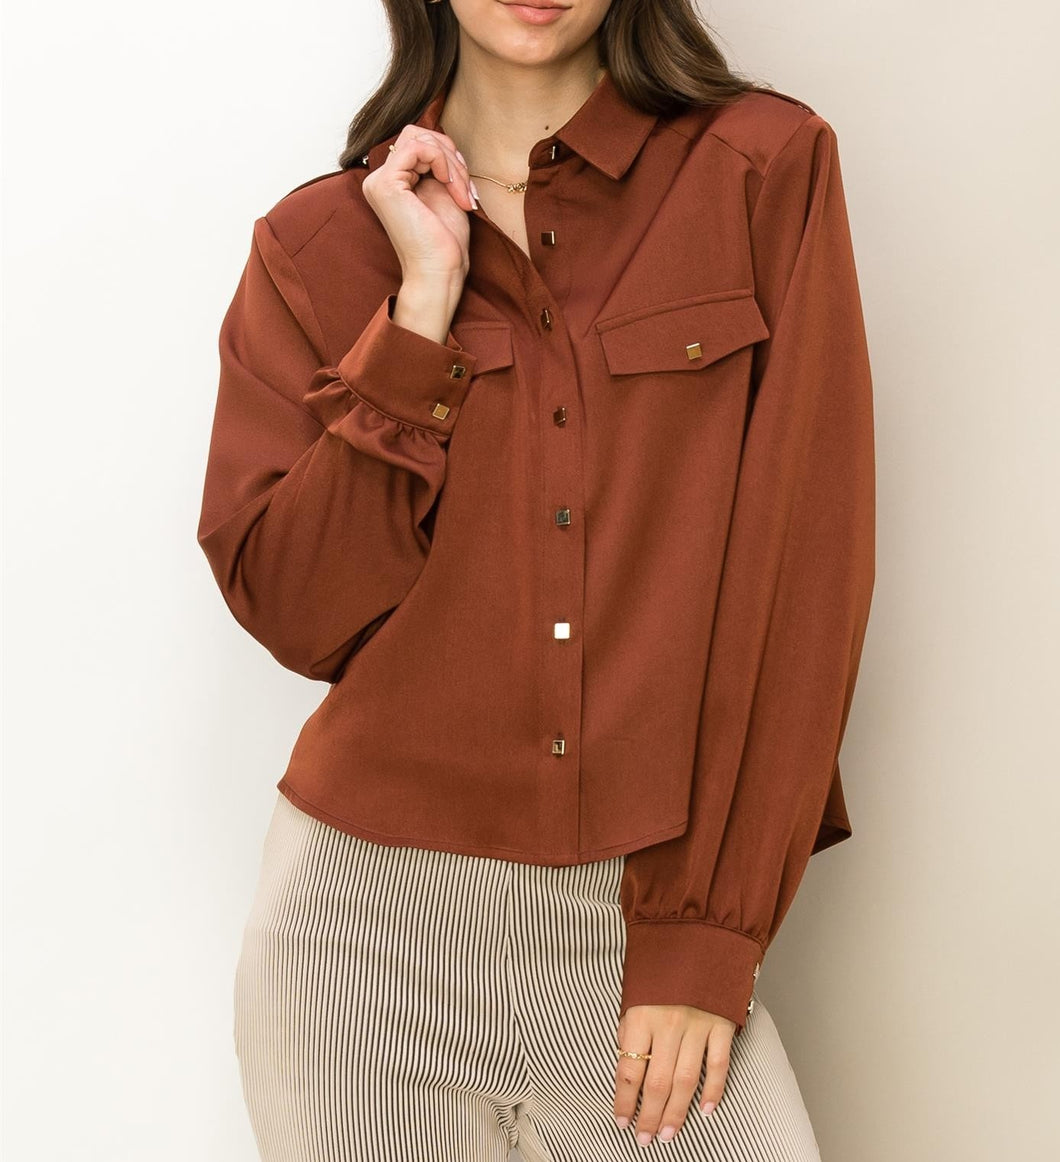 Working Day and Night Blouse Brown or Blue